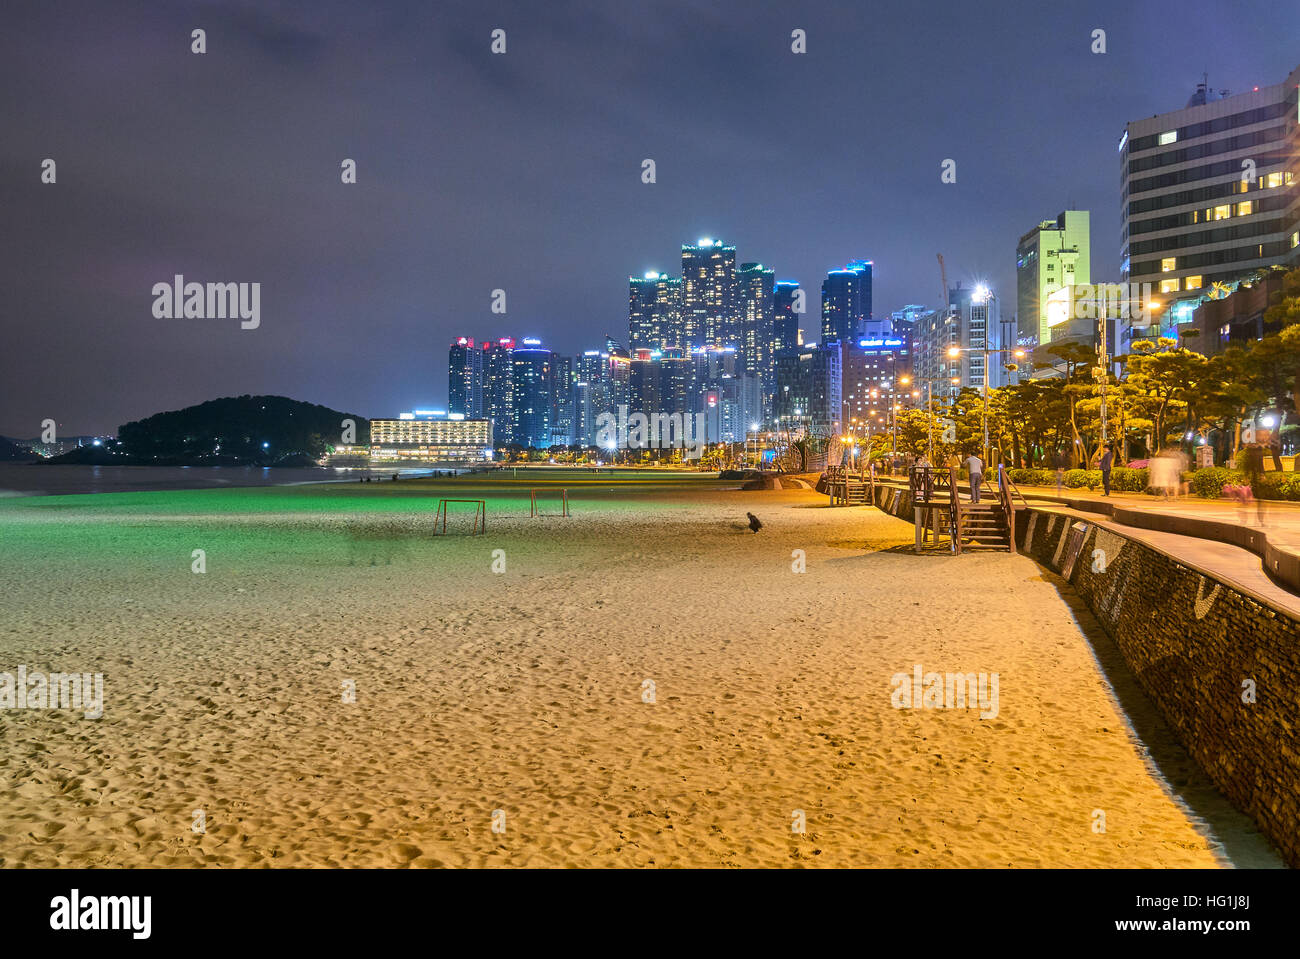 Night view of Haeundae, which is one of the most famous beach by its high-rise buildings, beautiful beaches and easy access from the city. Stock Photo